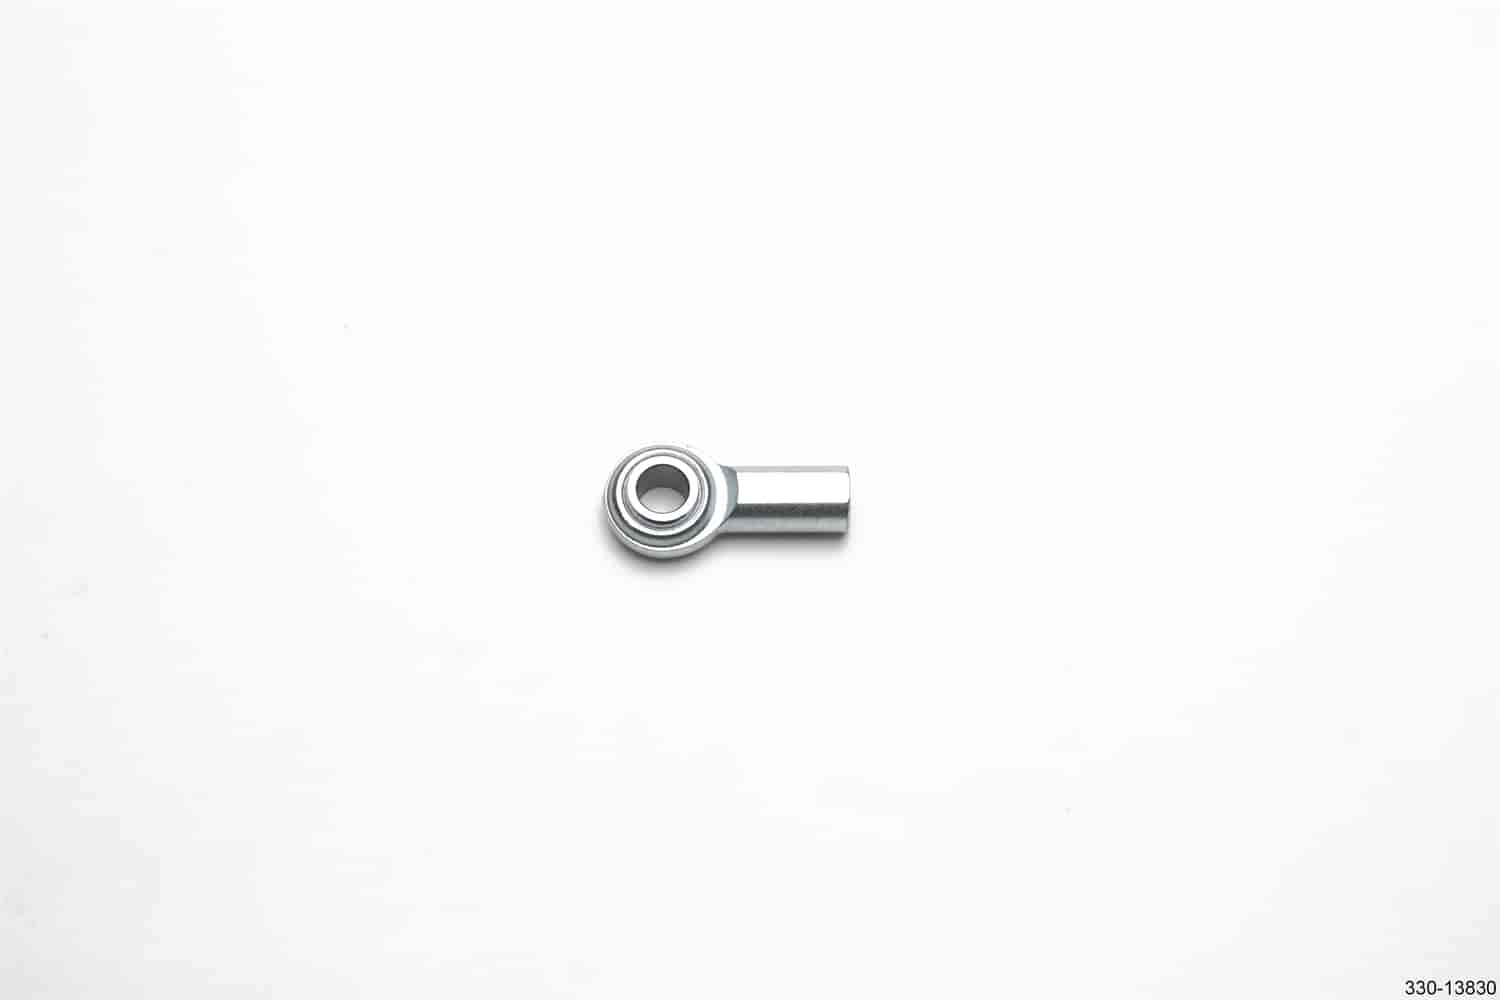 330-13830 Bearing Rod End [Fits Trunnion Style Balance Bars]